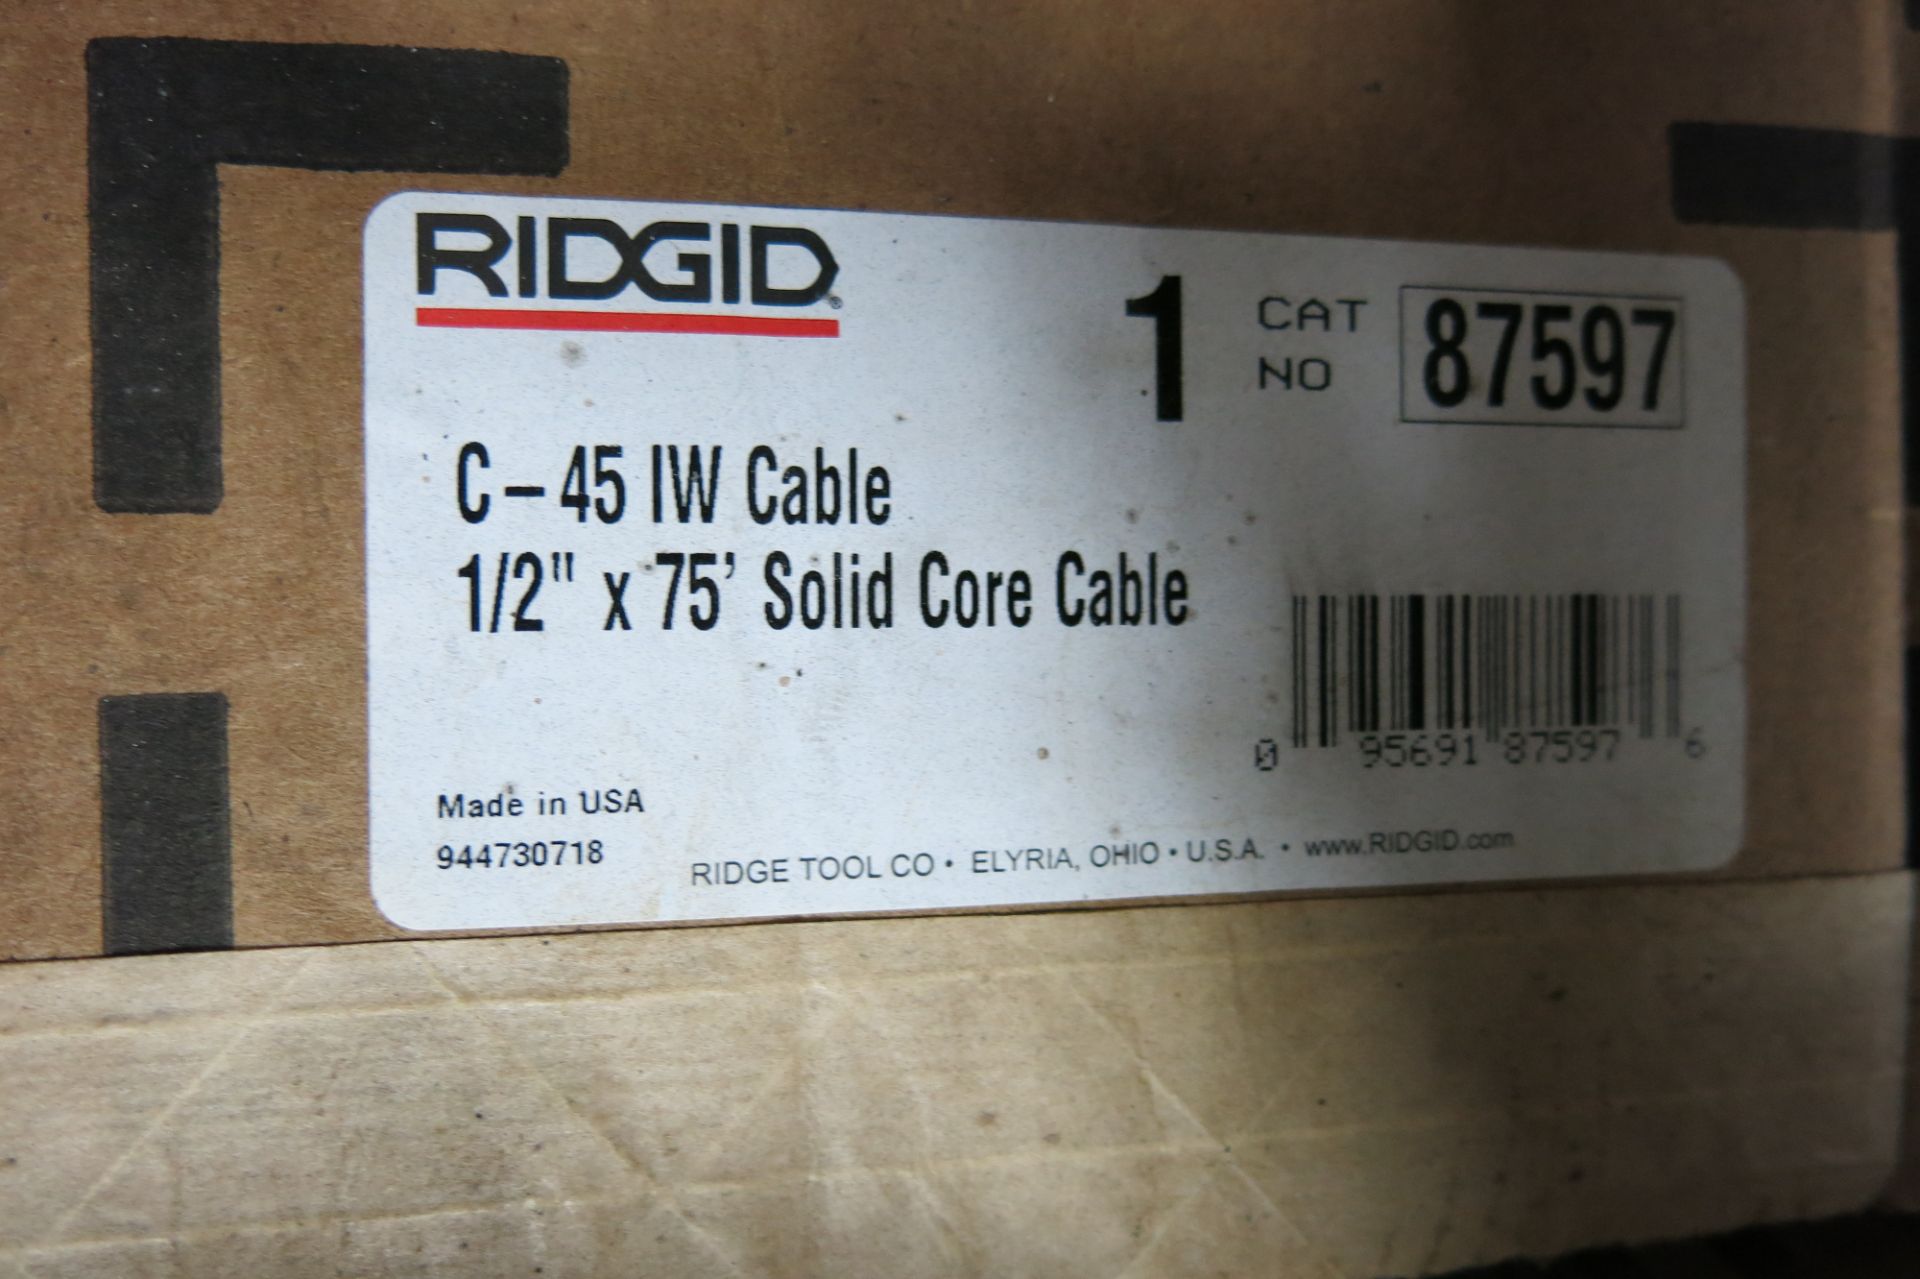 LOT OF RIDGID, C-45, 87597, IW CABLE, 1/2" X 75', SOLID CORE CABLE, C-32, IW CABLE, 3/8" X 75', - Image 2 of 3